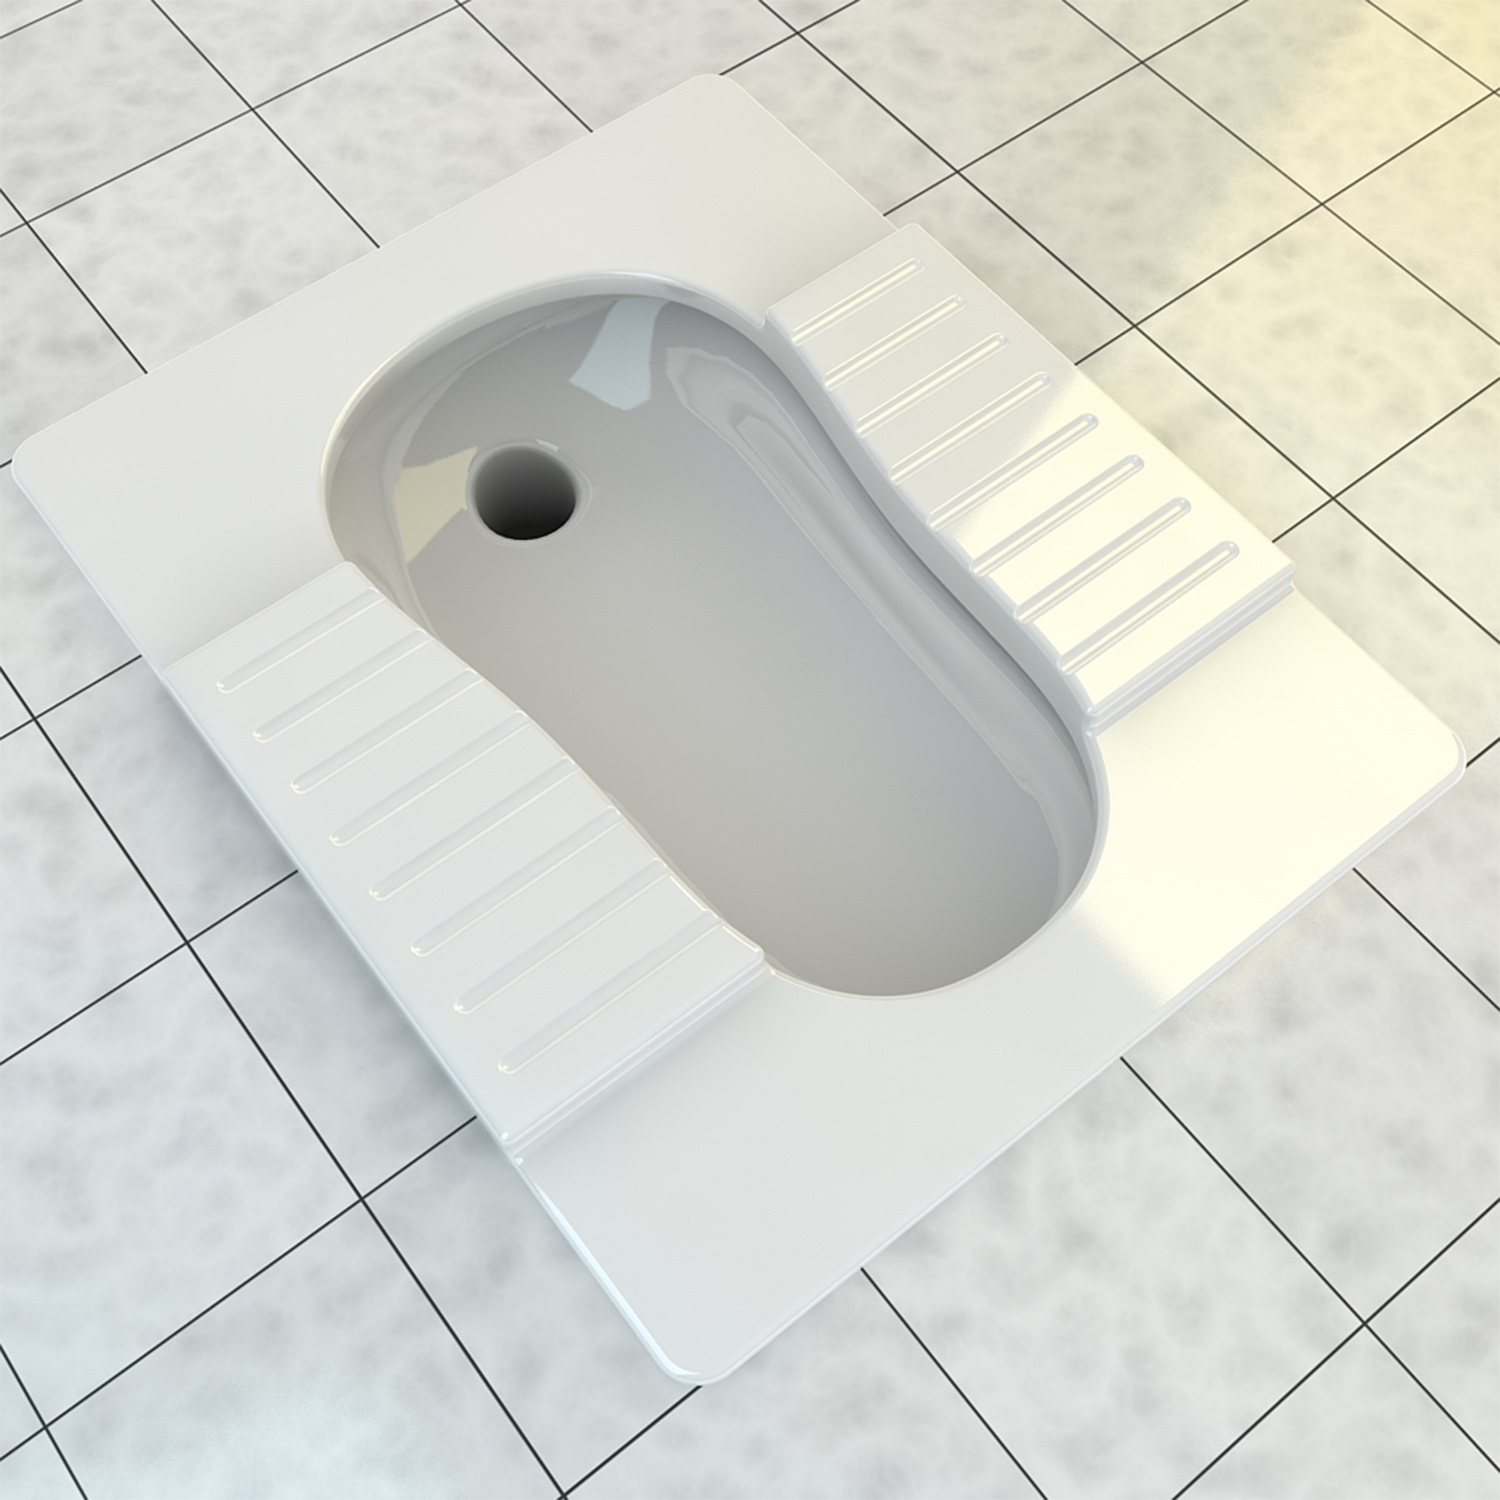 How to use Squat toilet or Iranian toilet?